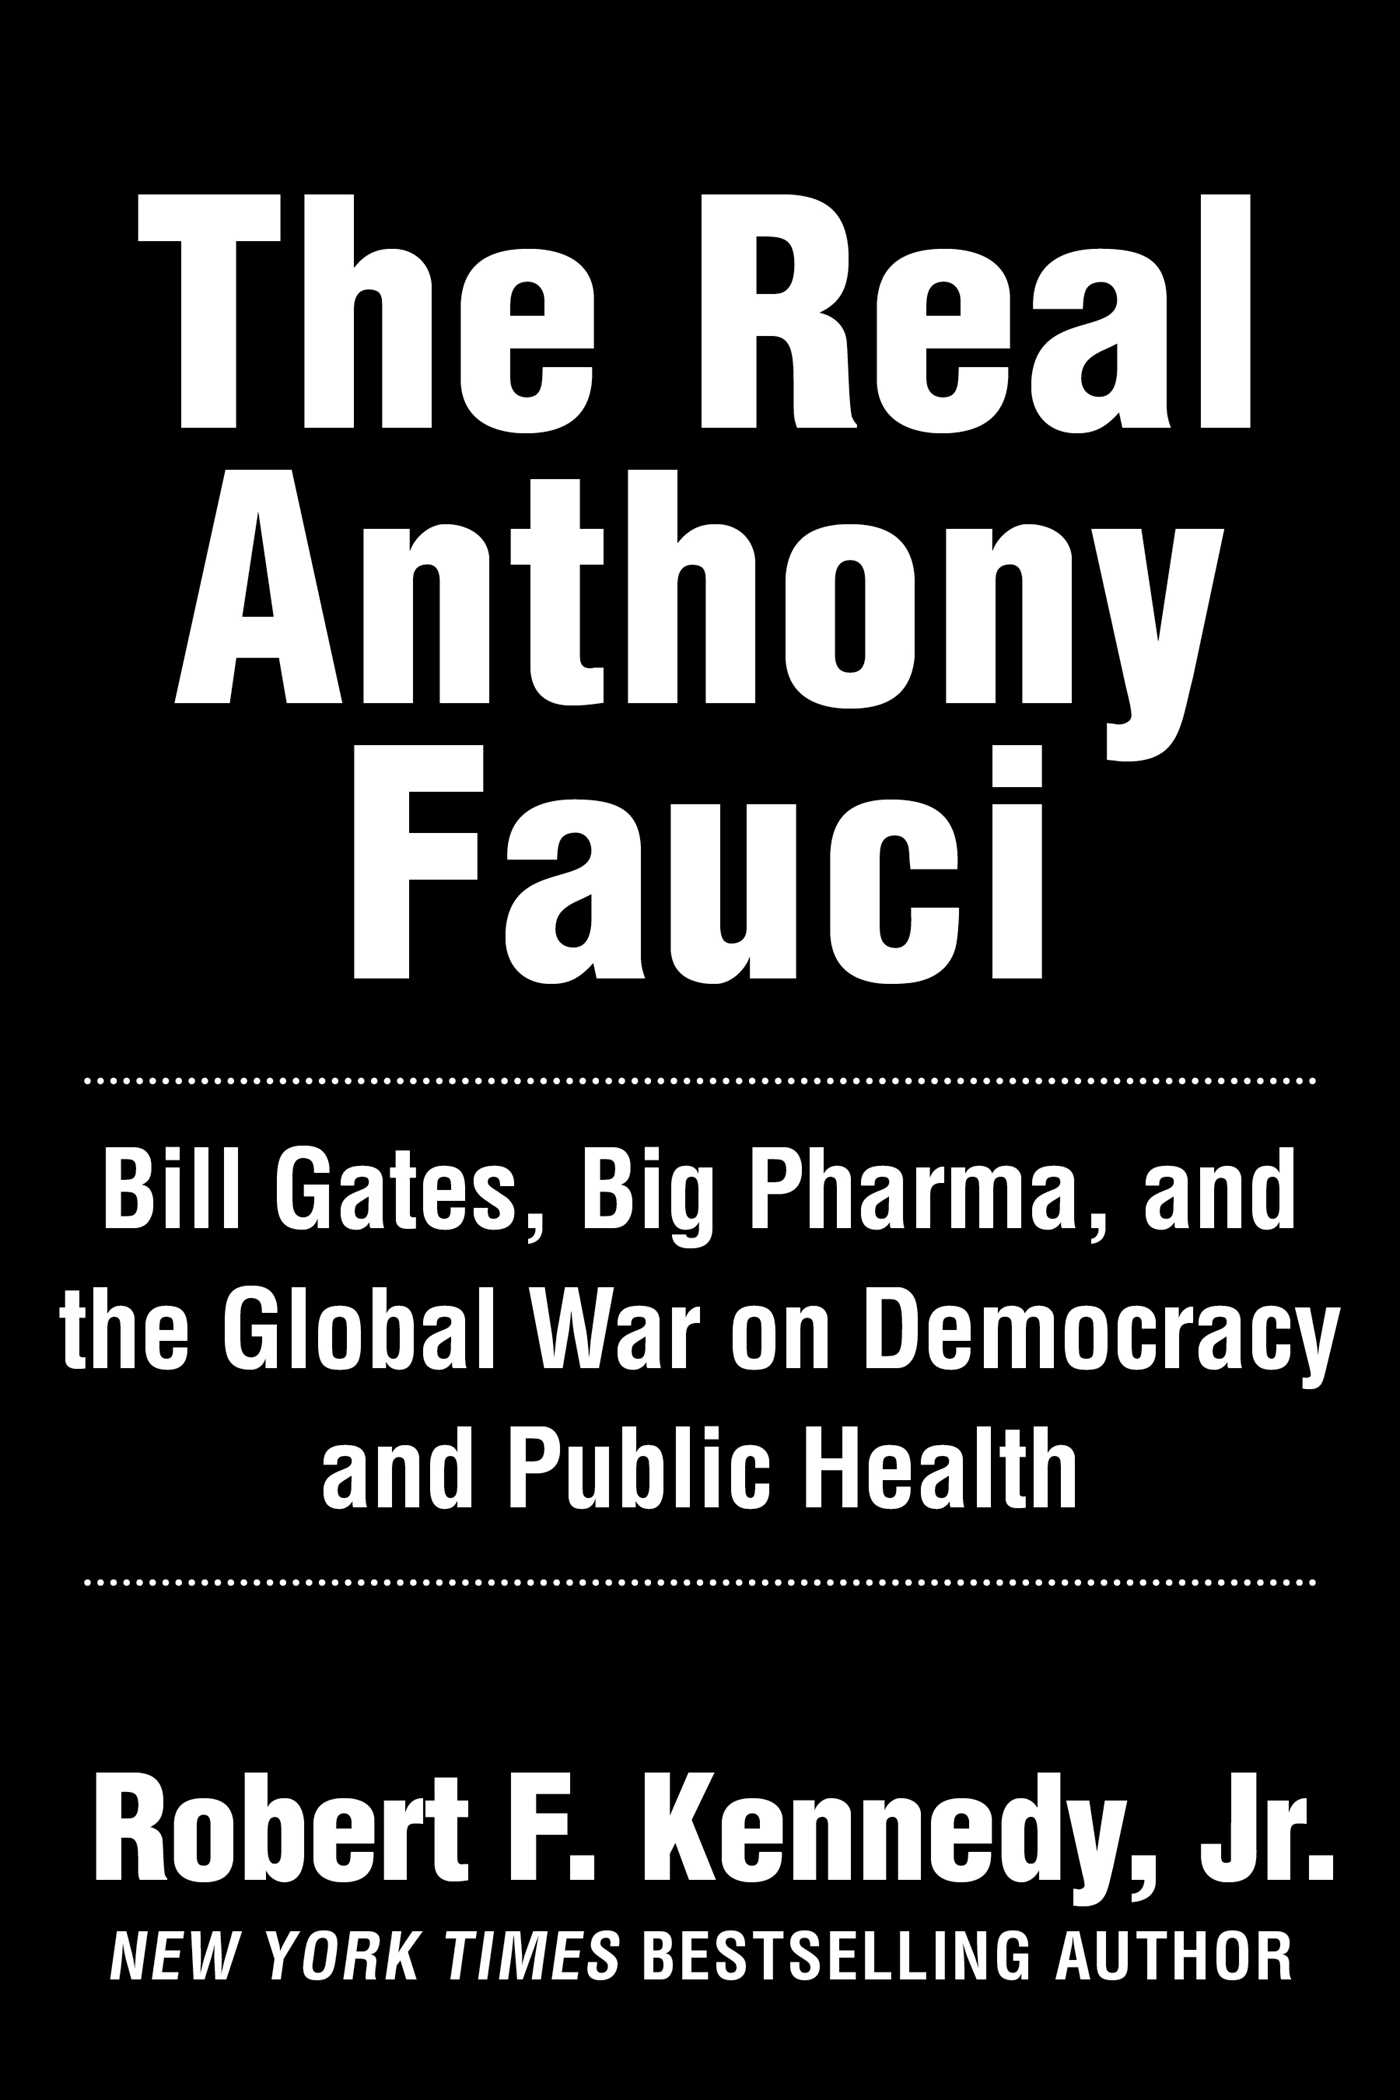 Children's Health Defense: The Real Anthony Fauci : Bill Gates, Big Pharma, and the Global War on Democracy and Public Health (Hardcover) - image 1 of 1